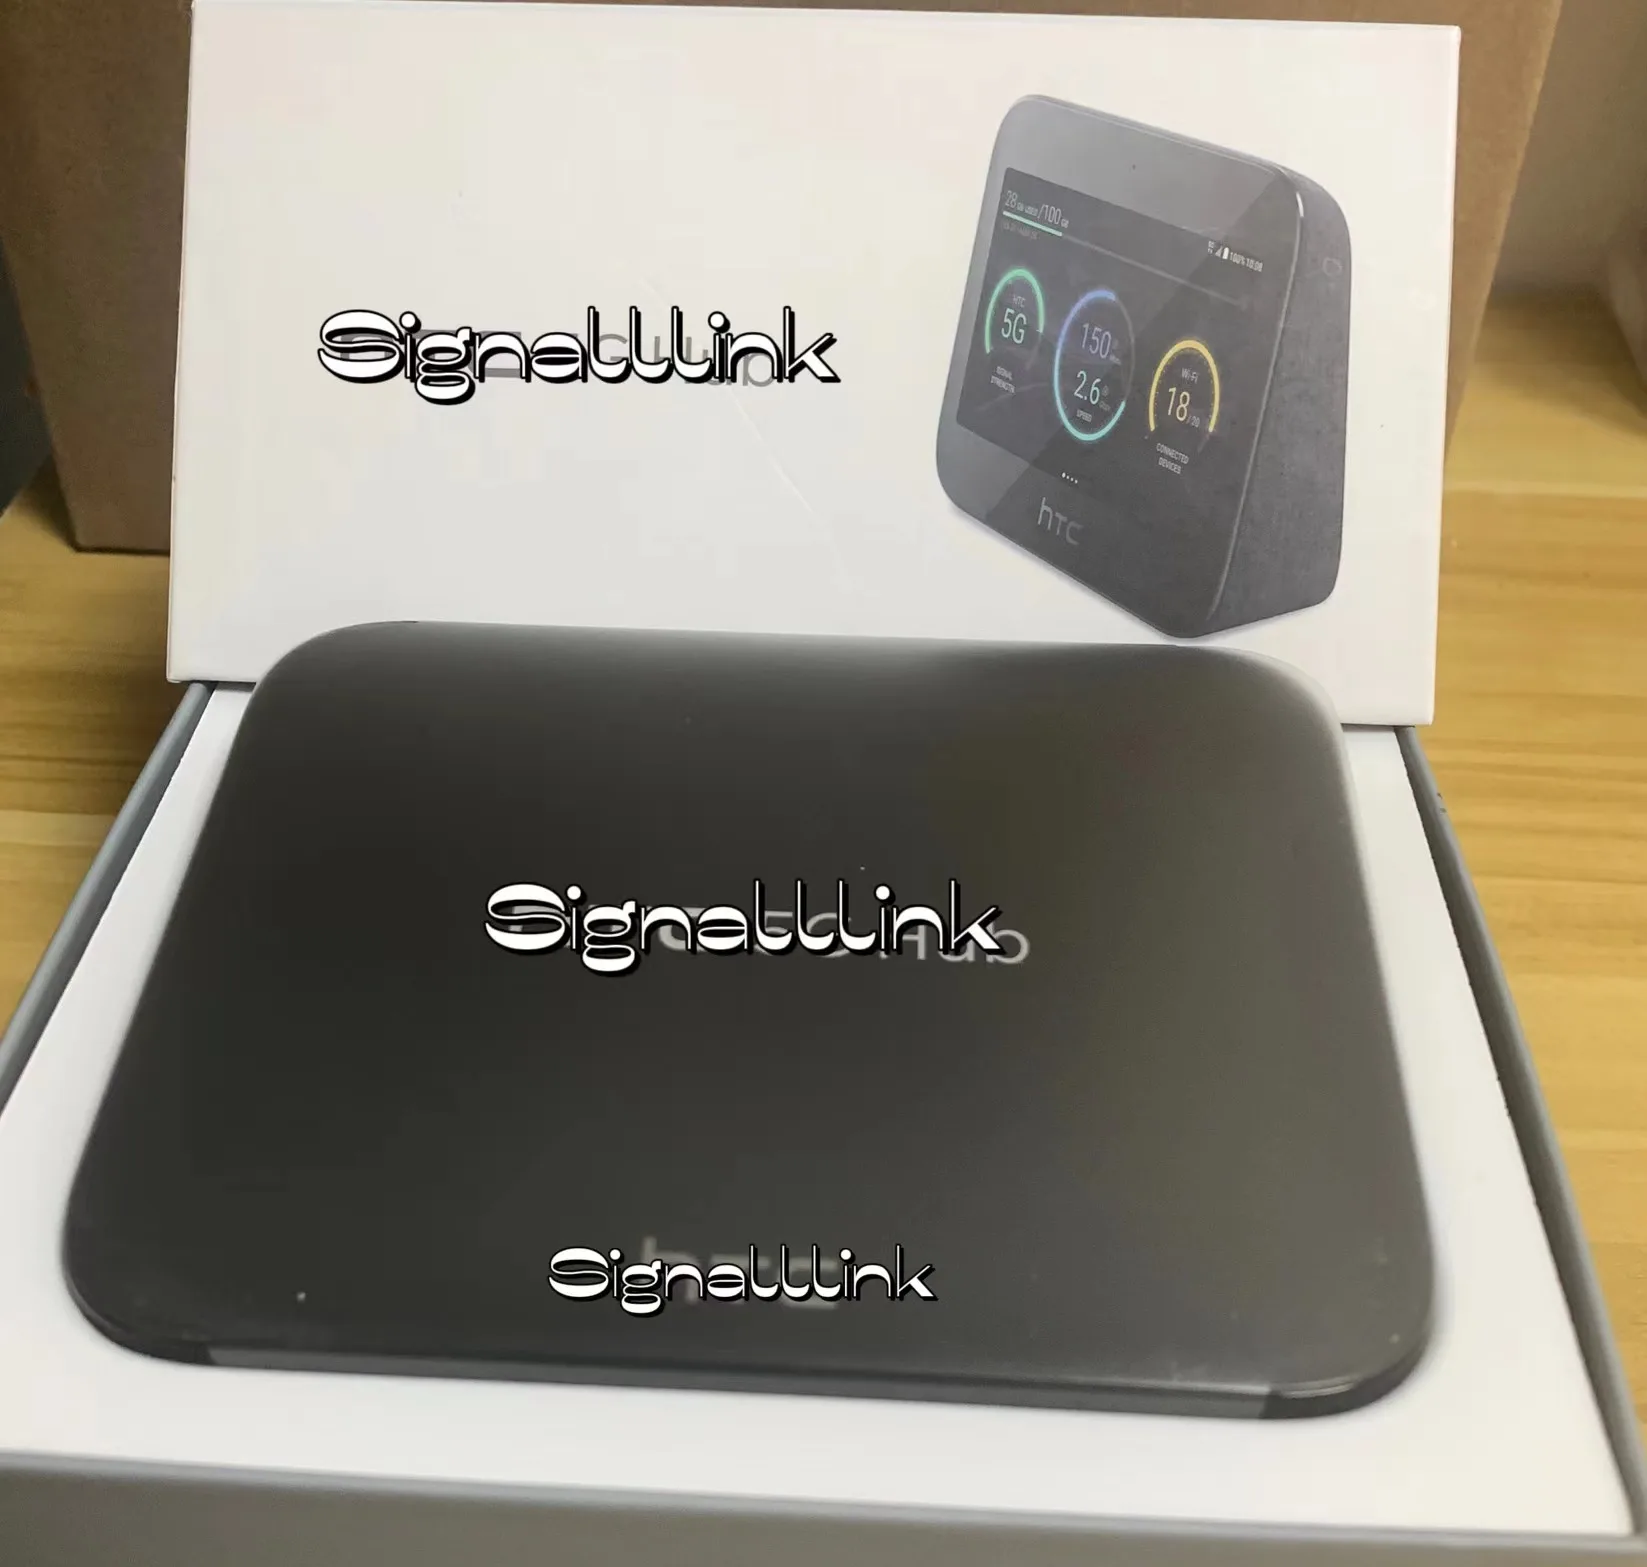 Signallink 5g hub router high-speed Gigabit indoor and outdoor portable wifi unlocked plug-in card(Europe version 99%new)